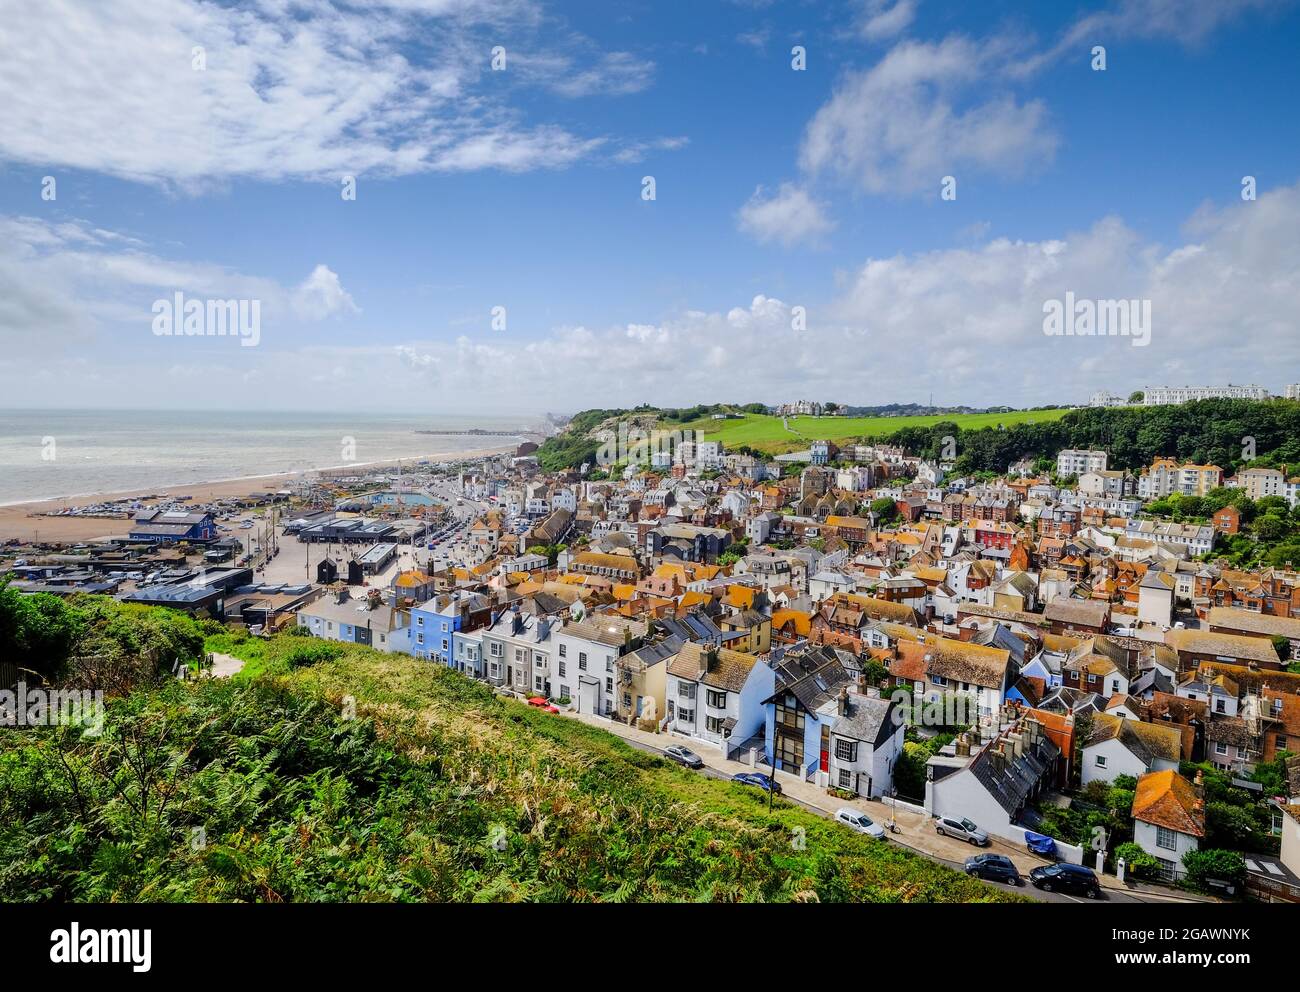 Hastings Old Town, Hastings, Sussex, Regno Unito Foto Stock